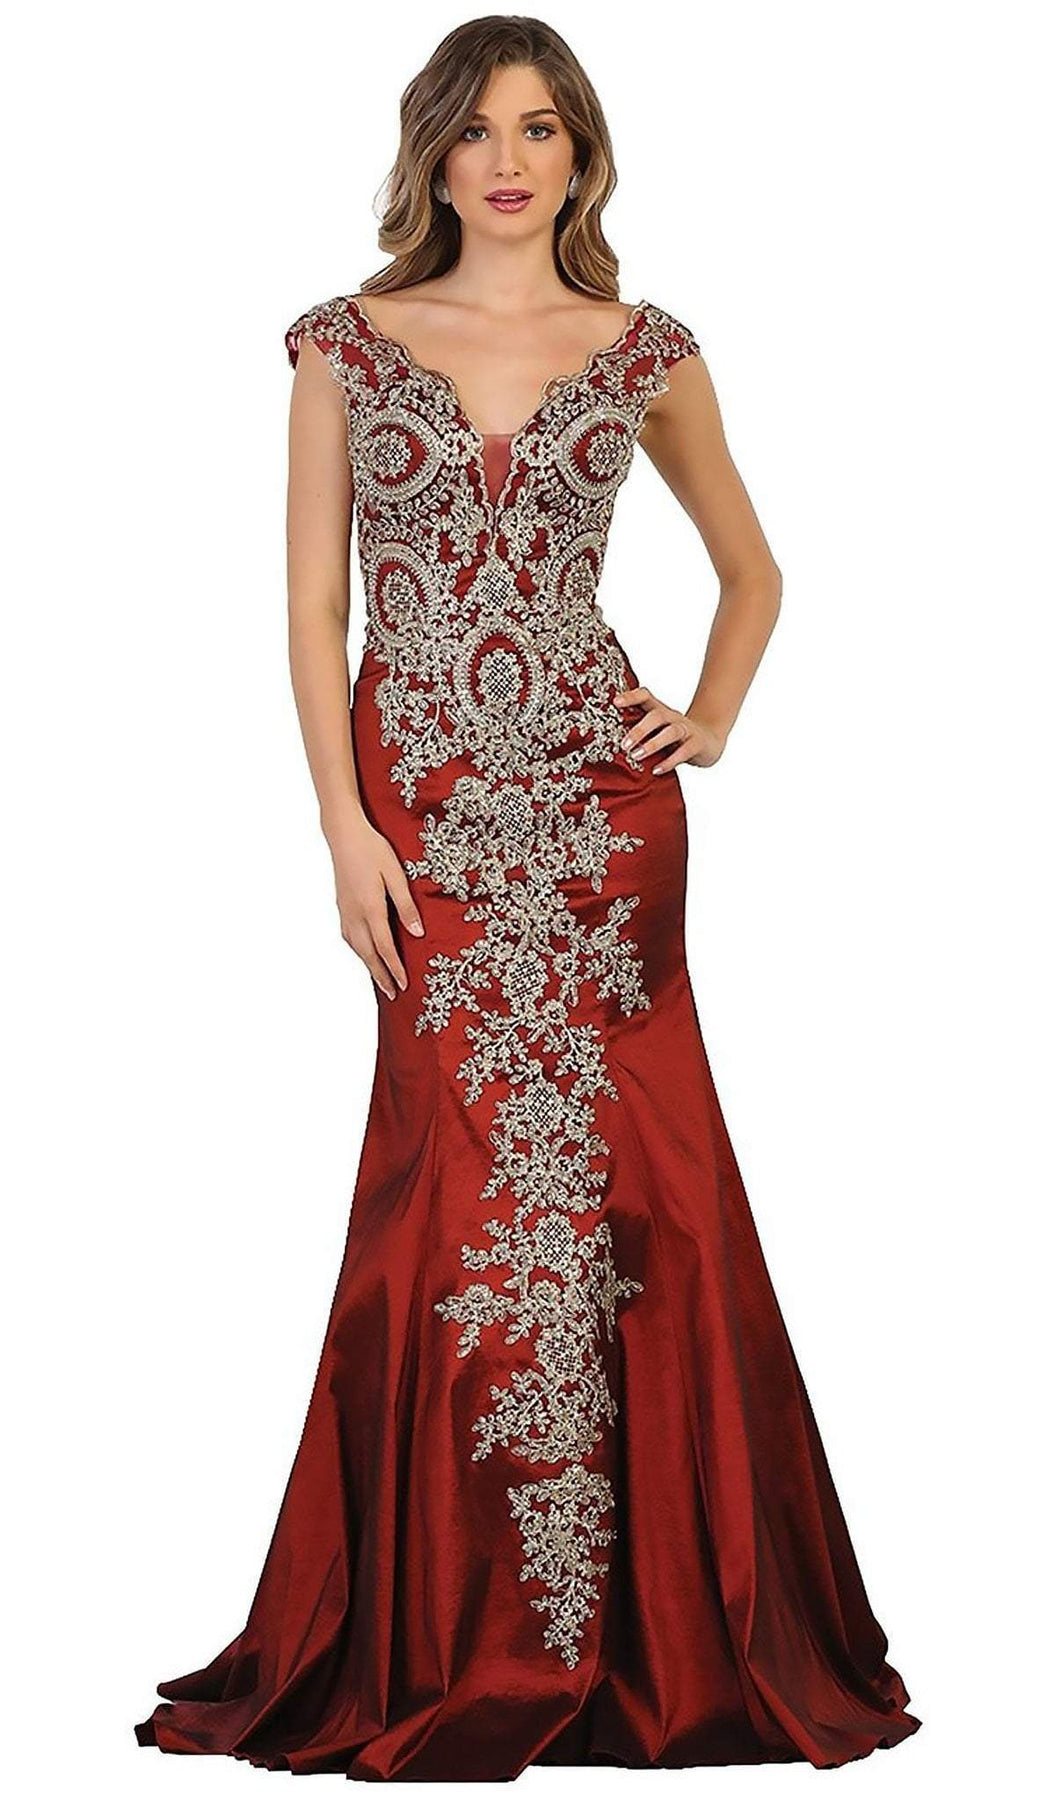 May Queen - RQ7602 Embellished Wide V-neck Sheath Mother of the Bride Gown Special Occasion Dress 4 / Burgundy/Gold